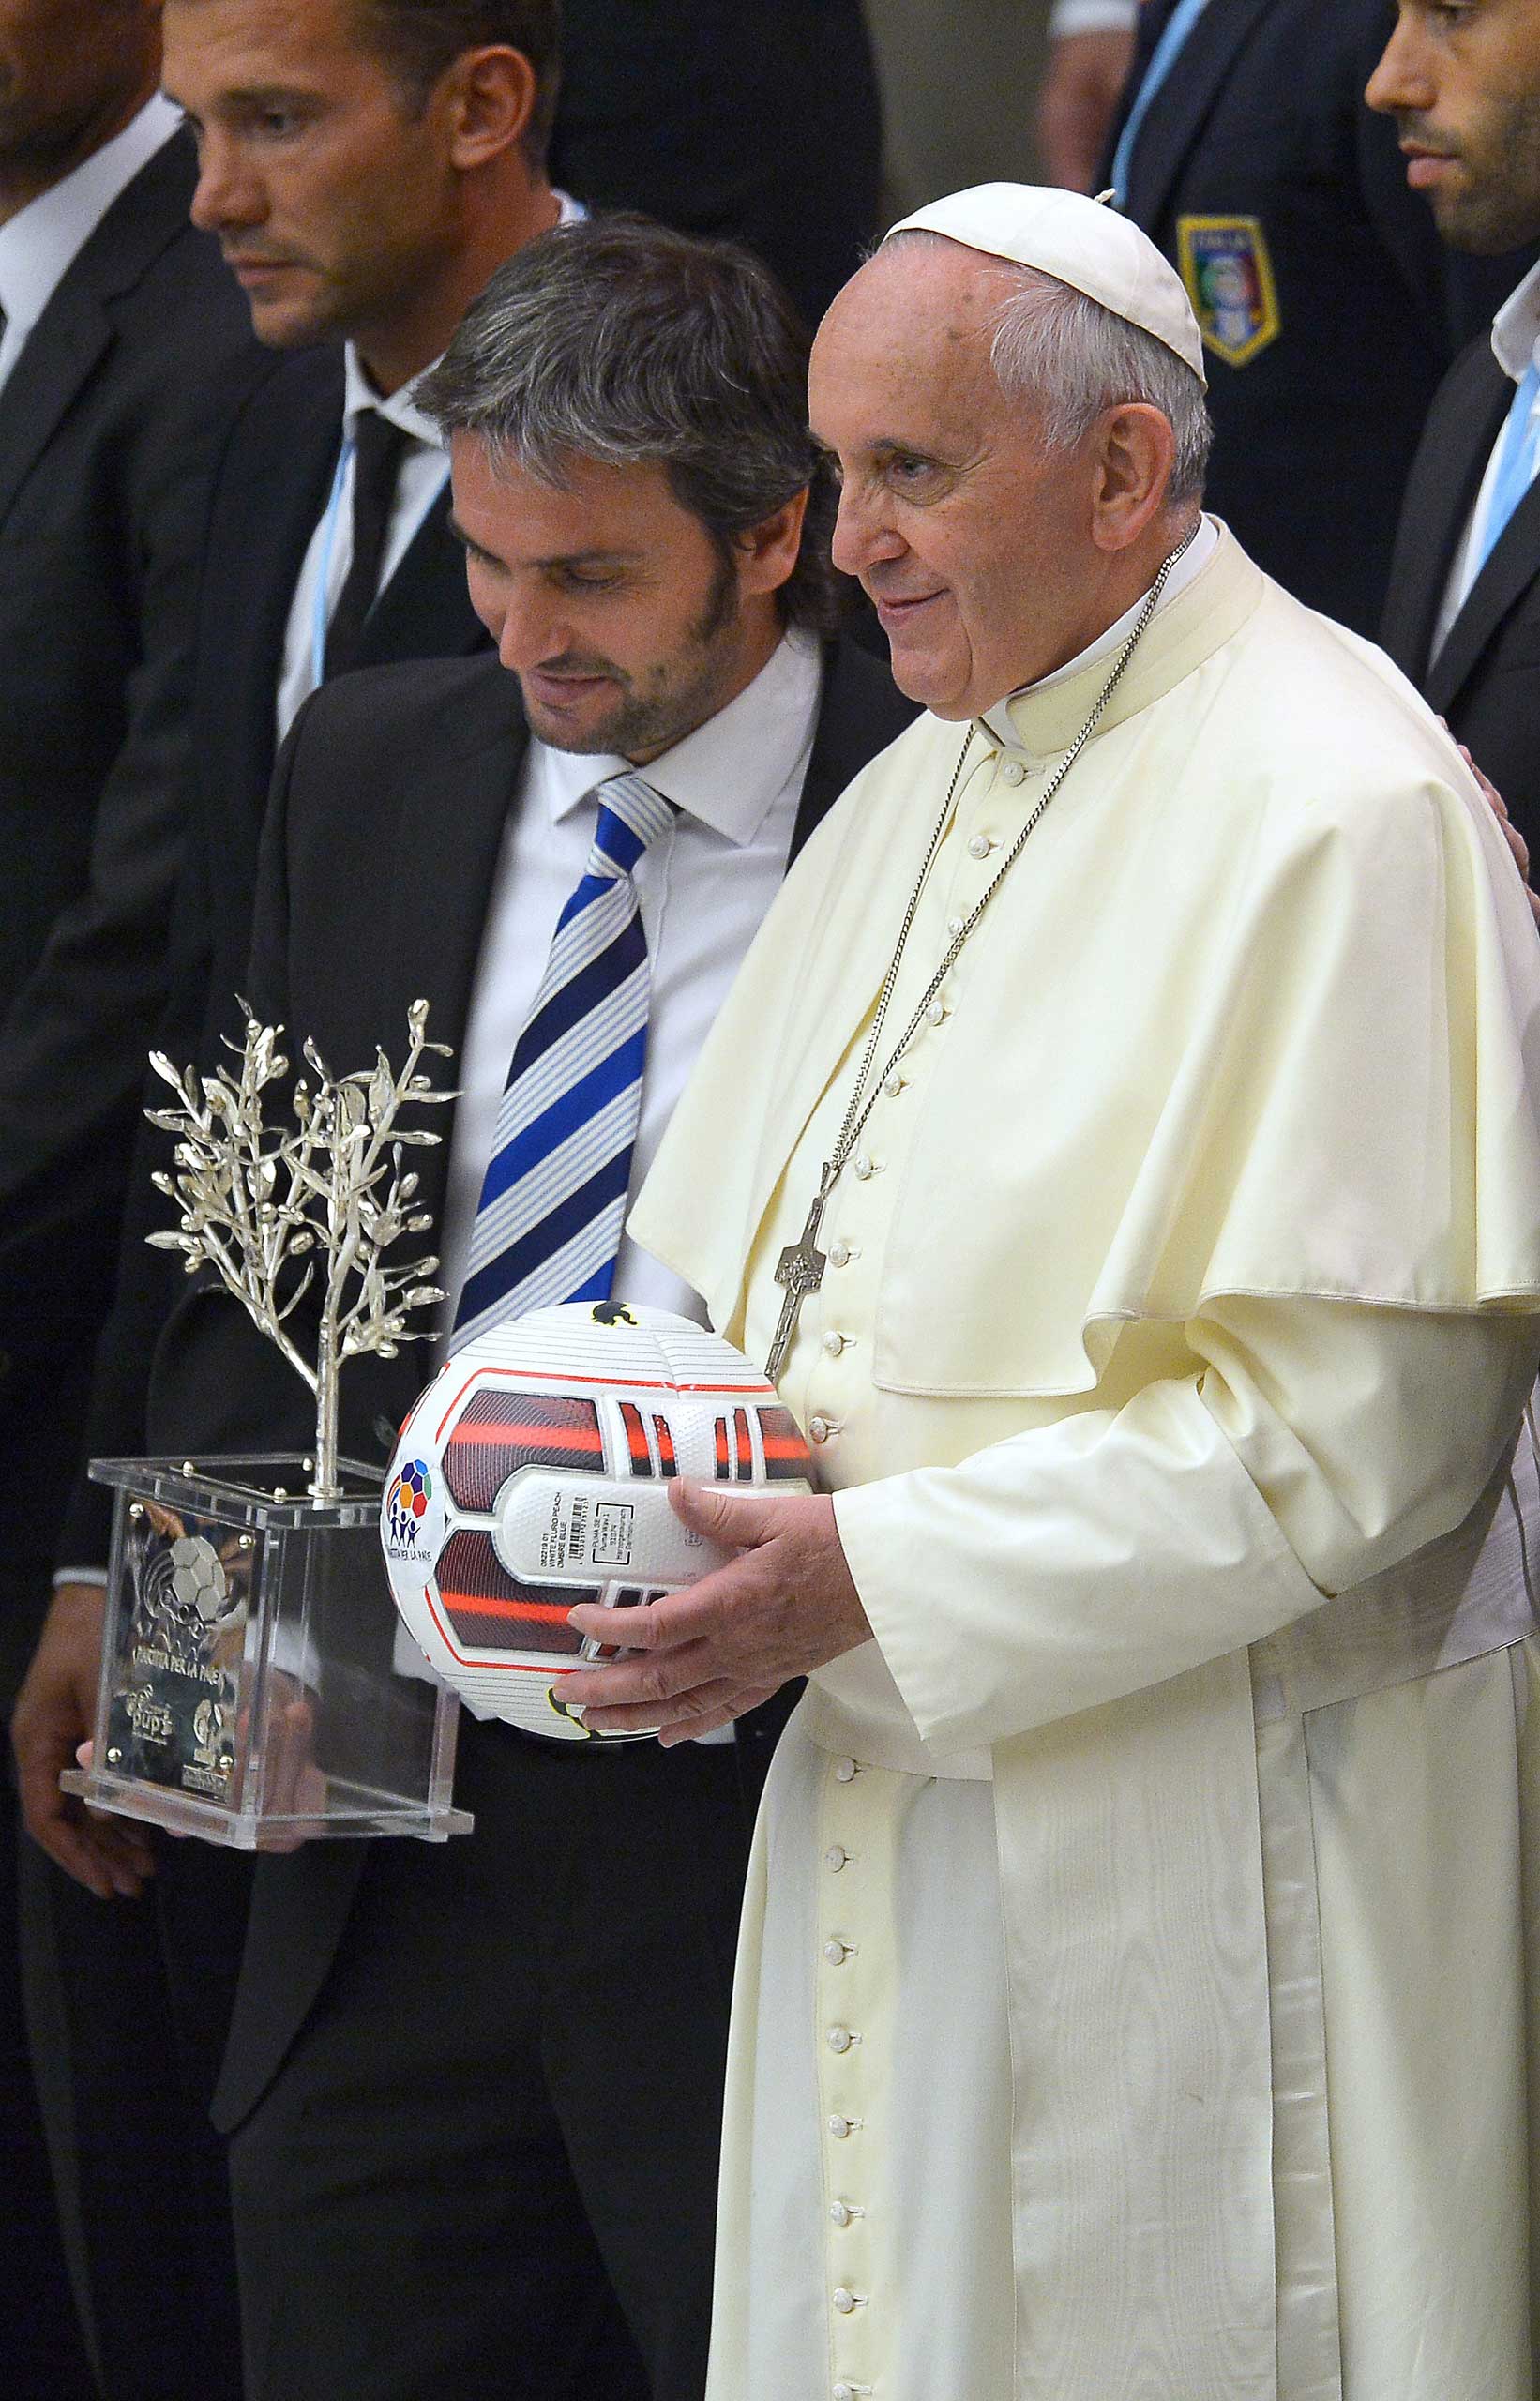 Argentinian silversmith Adrián Pallaros and Pope Francis pose with international soccer players at the Vatican on Sept. 2014 prior to an inter-religious "match for peace" soccer game that was played at Rome's Olympic Stadium. (Vincenzo Pinto—AFP/Getty Images)